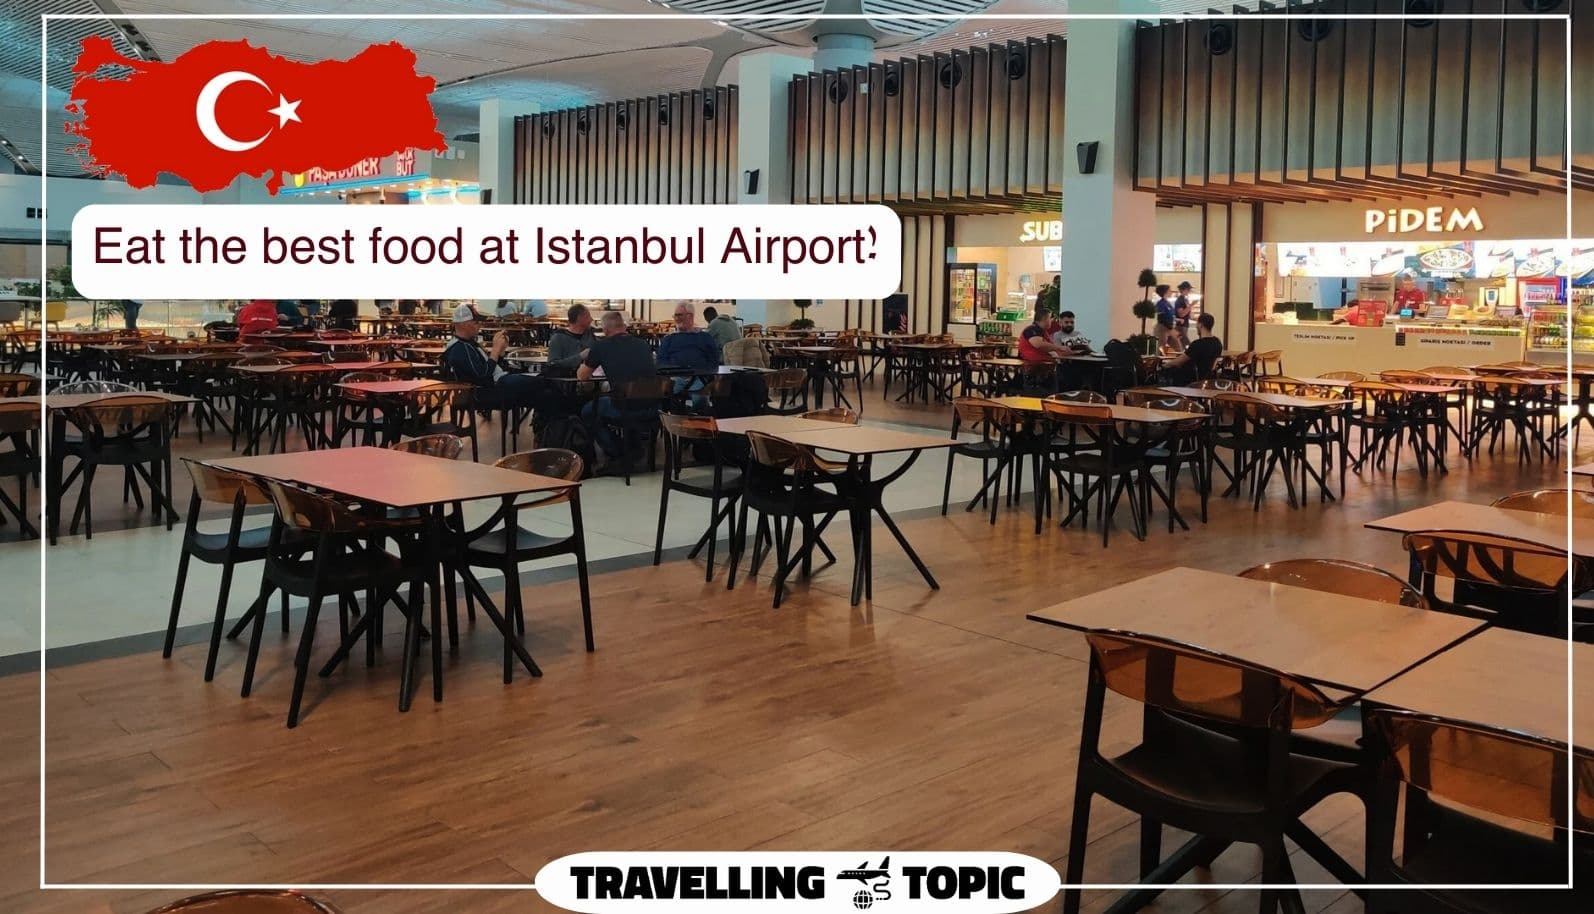 Eat the best food at Istanbul Airport!